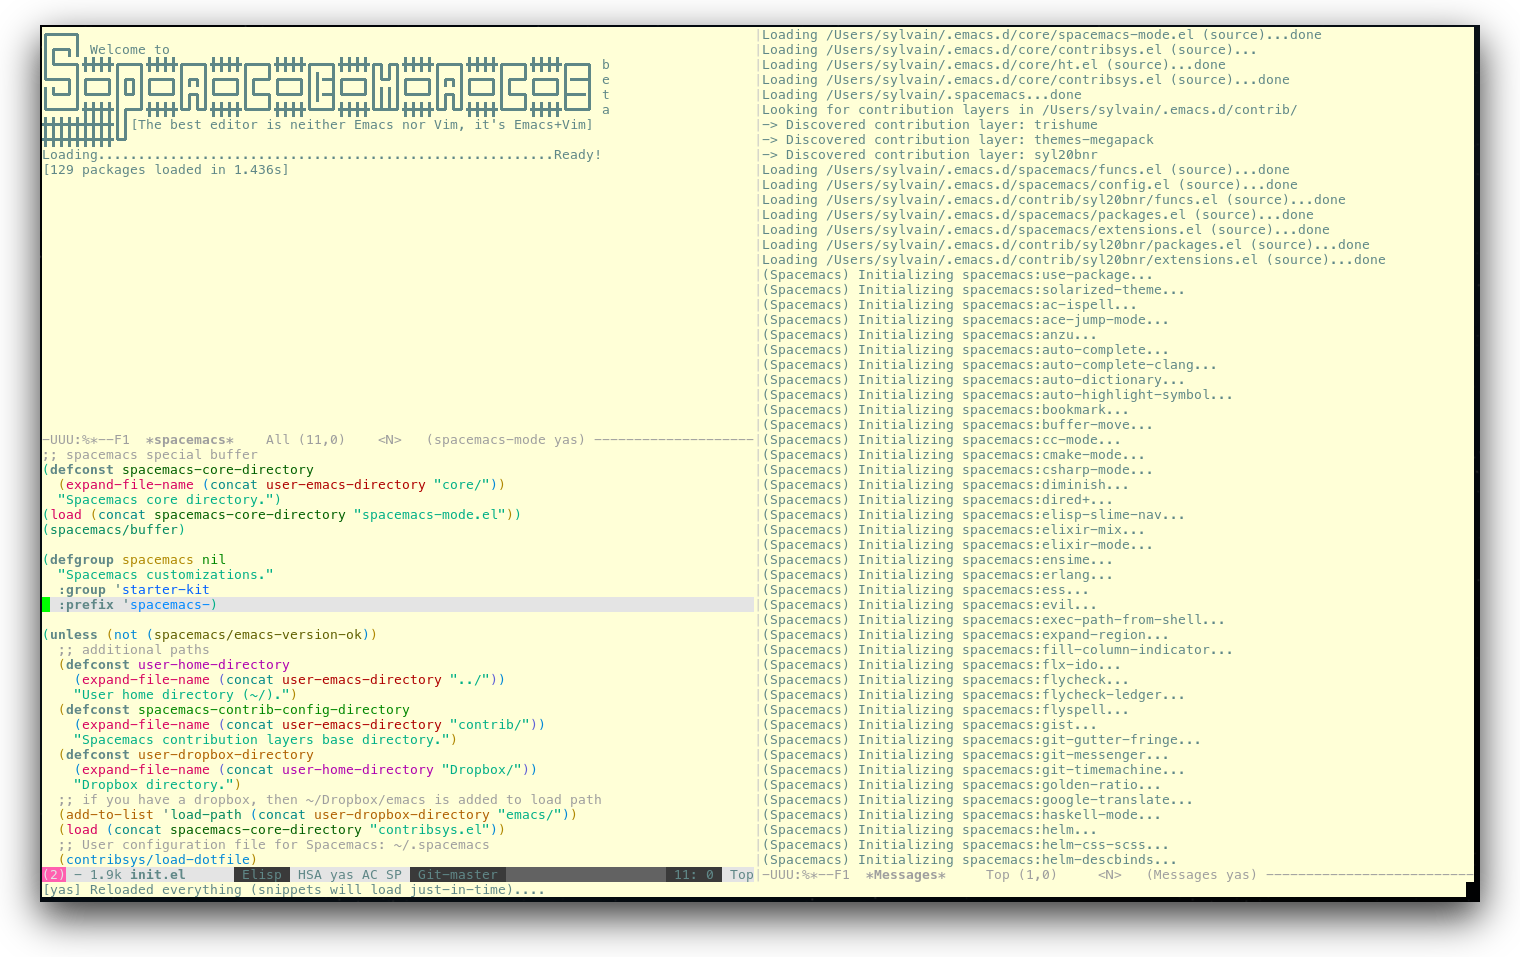 /TakeV/spacemacs/media/commit/d04ed6dc25231465296c273b6fe758b92ca7a6c1/doc/img/spacemacs-urxvt.png